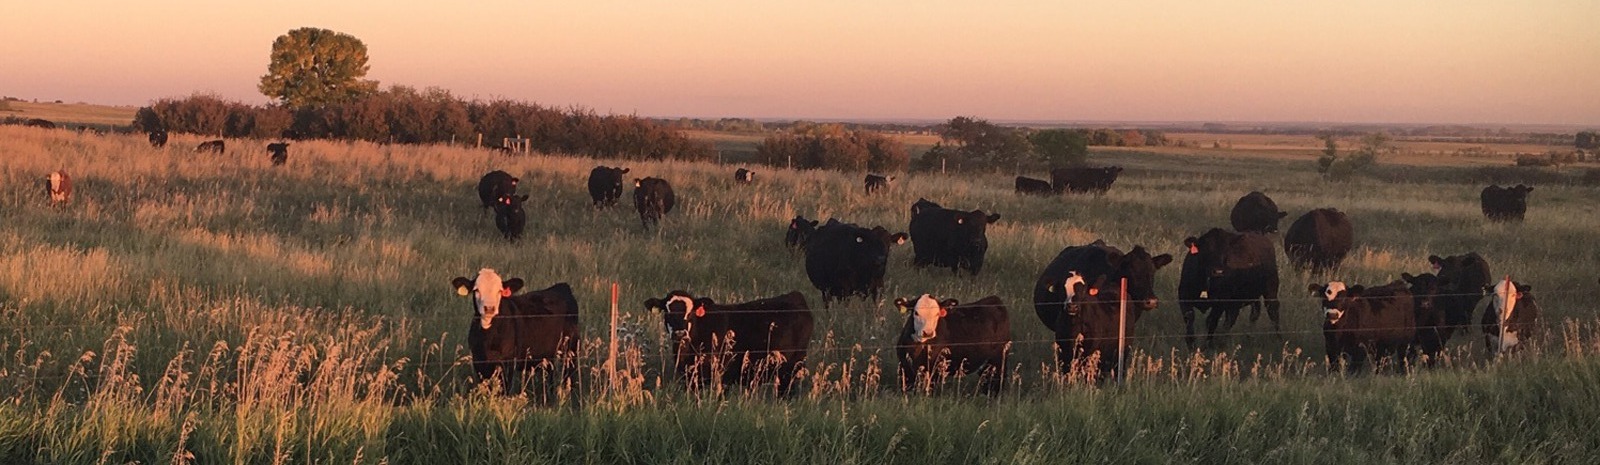 Cattle in pasture summertime.